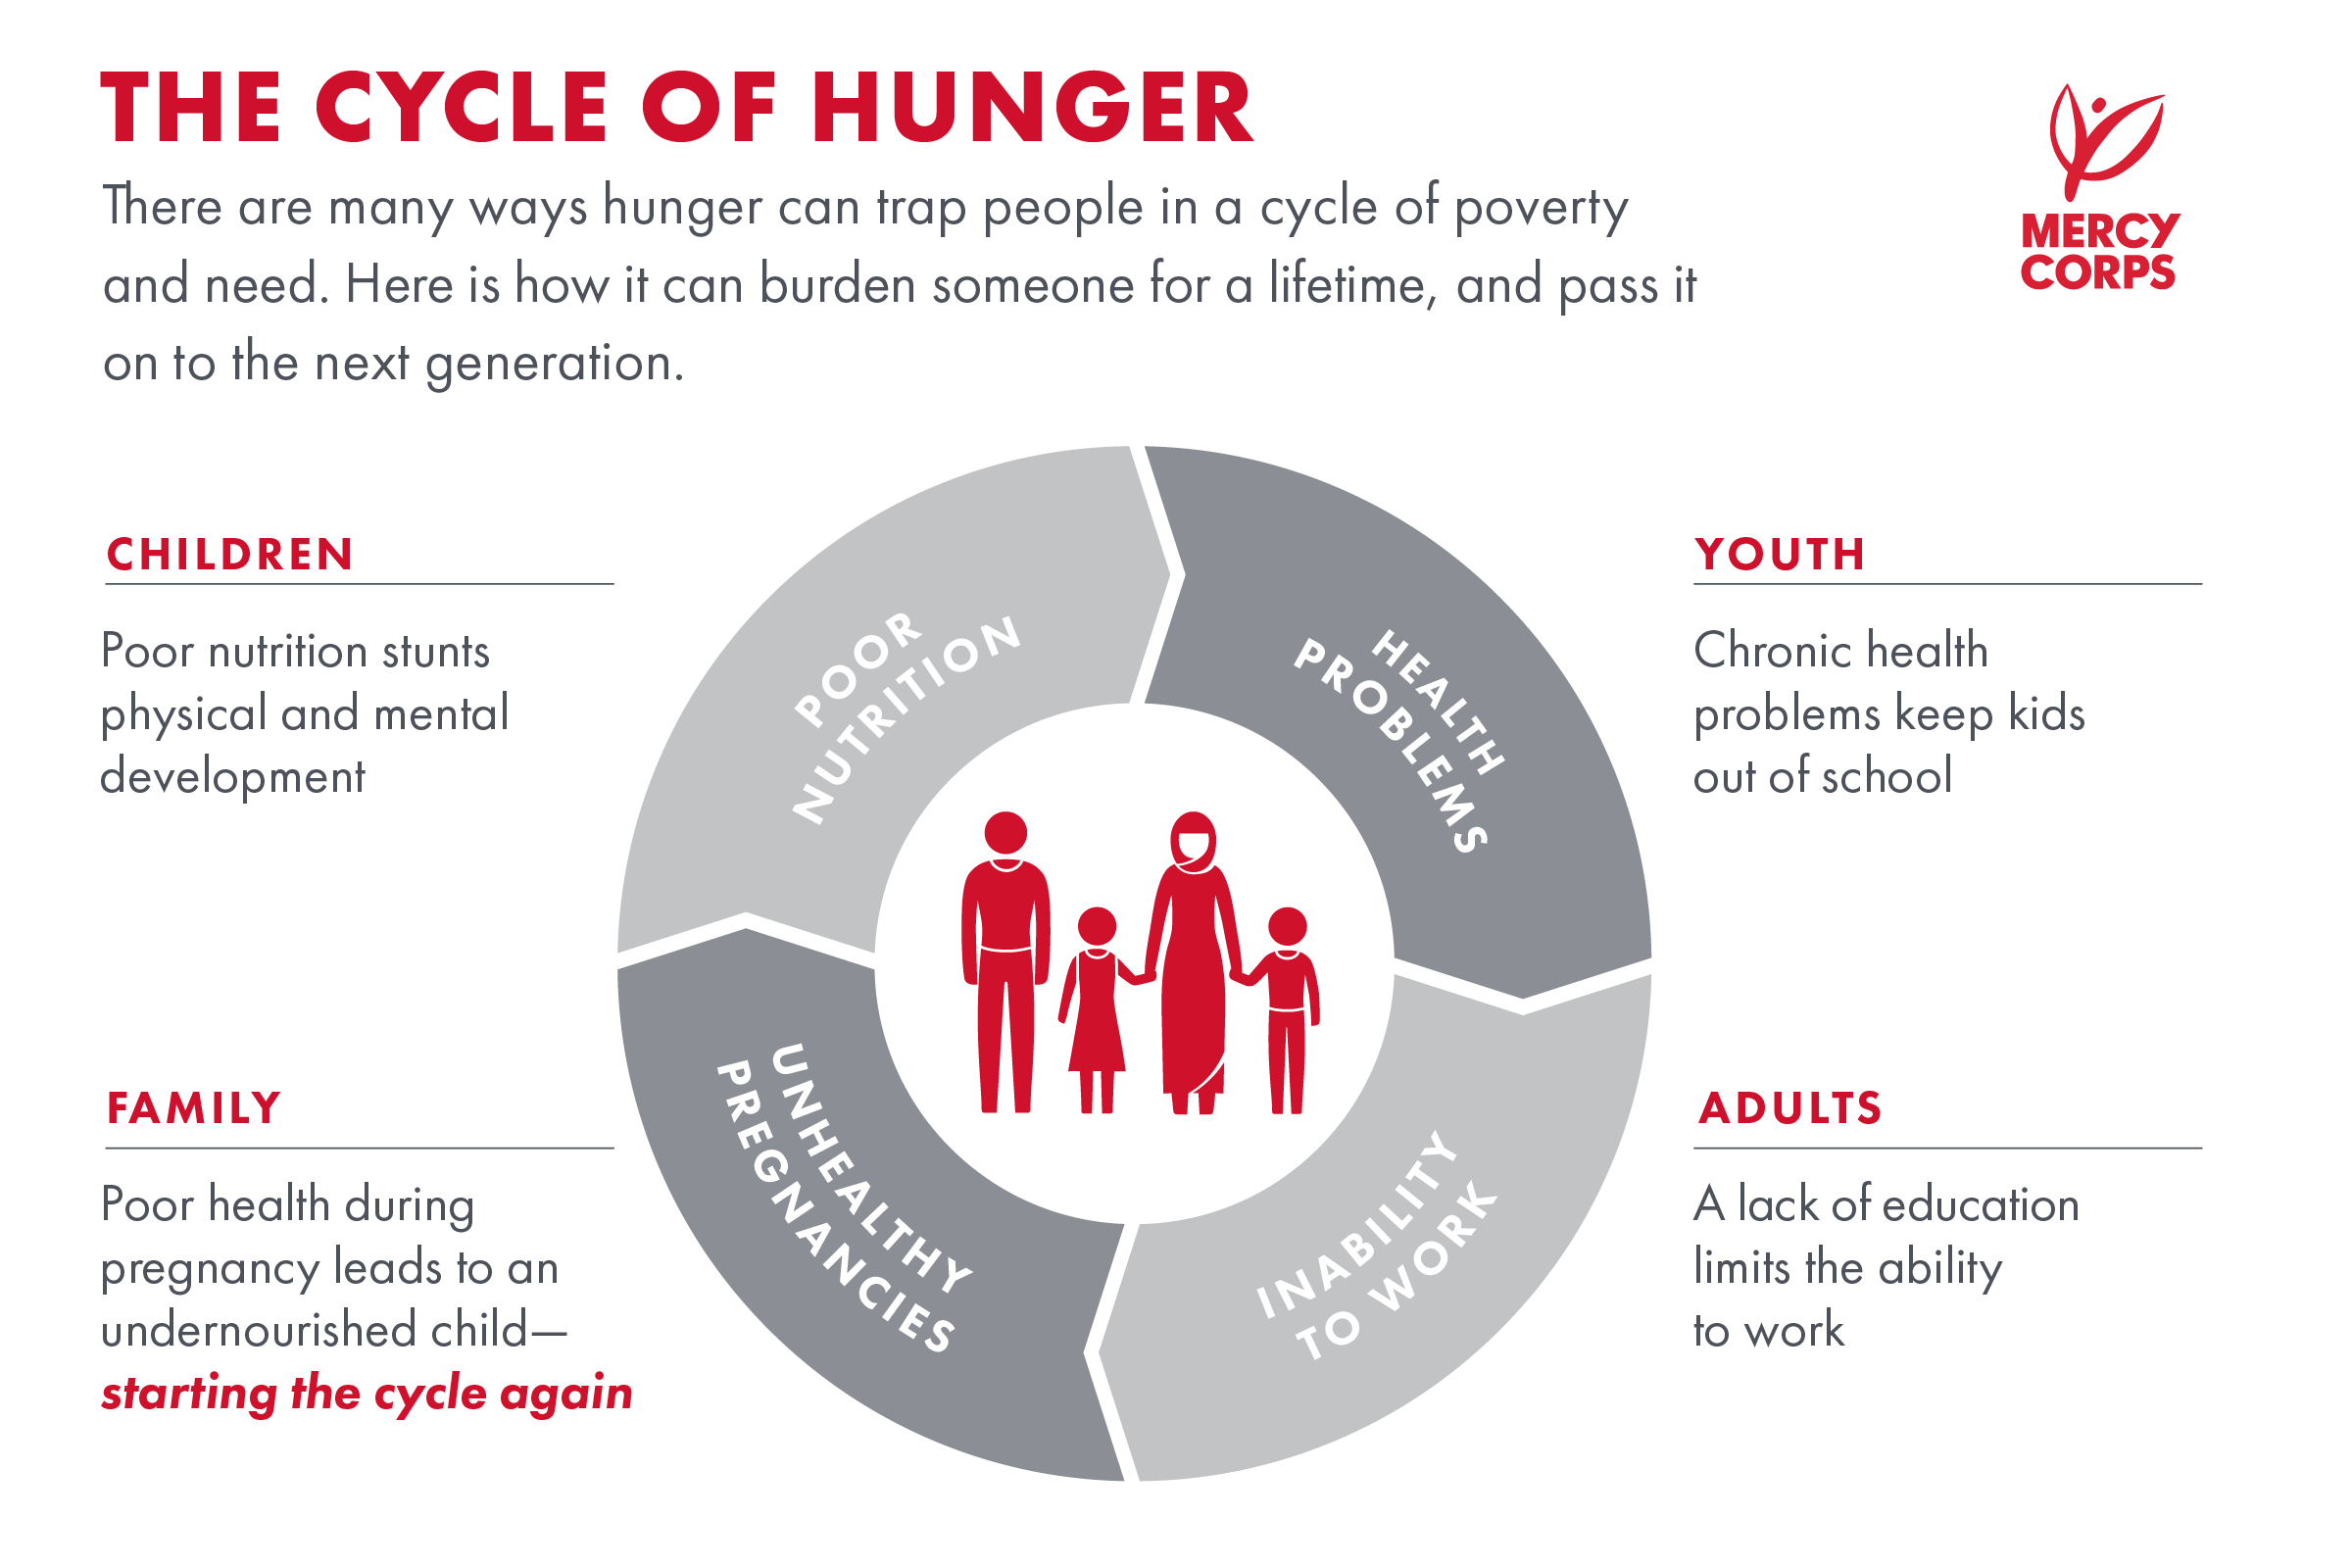 There are many ways hunger can trap people in a cycle of poverty and need. Poor nutrition can lead to health problems, the inability to work, and unhealthy pregnancies - which starts the cycle again.